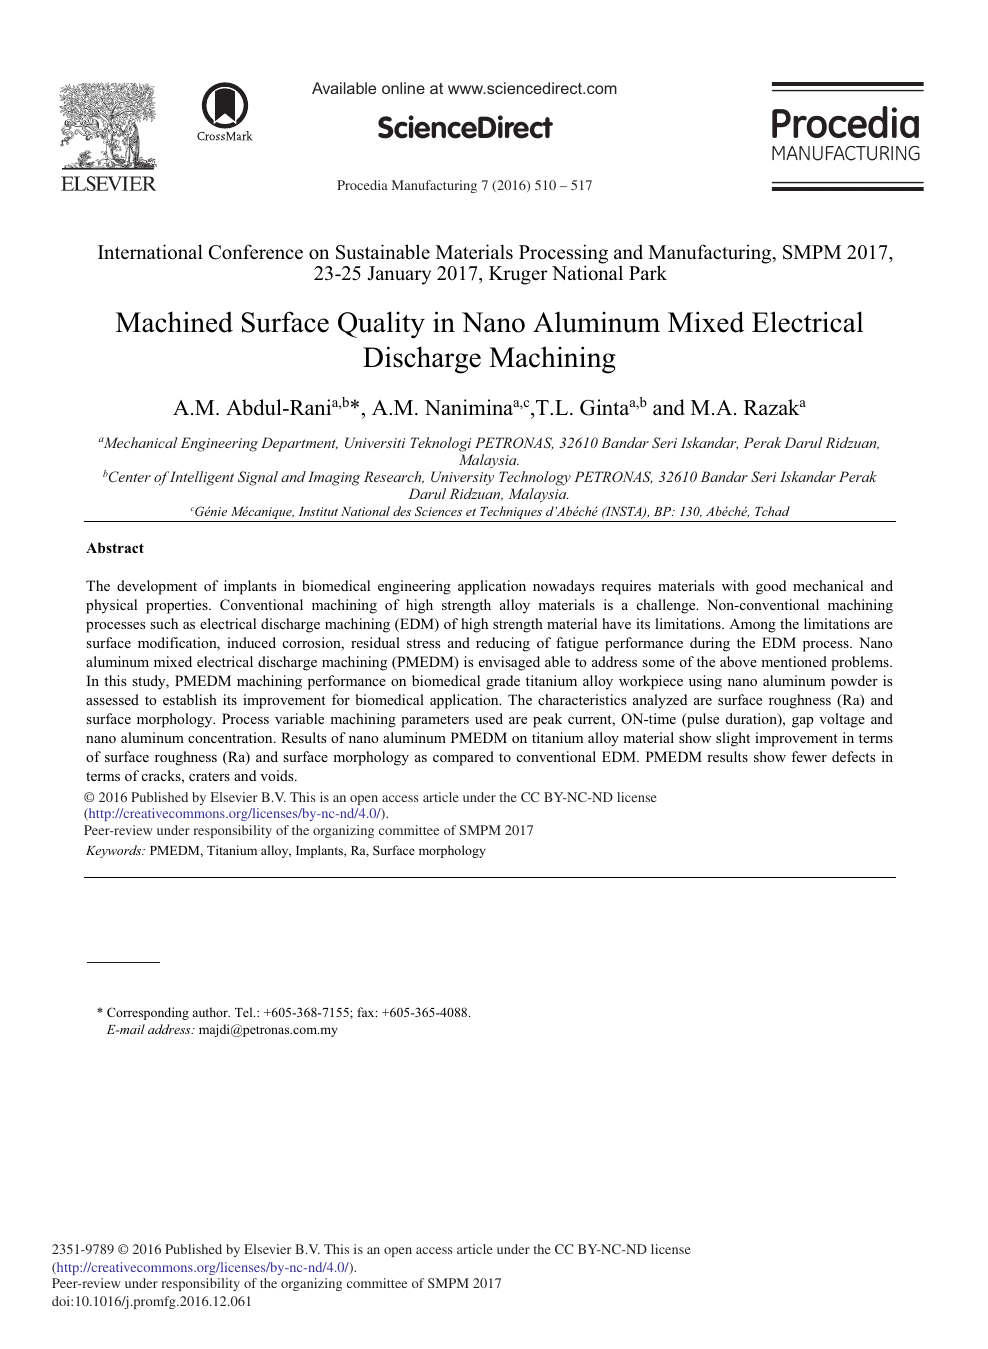 Machined Surface Quality In Nano Aluminum Mixed Electrical Discharge Machining Topic Of Research Paper In Materials Engineering Download Scholarly Article Pdf And Read For Free On Cyberleninka Open Science Hub